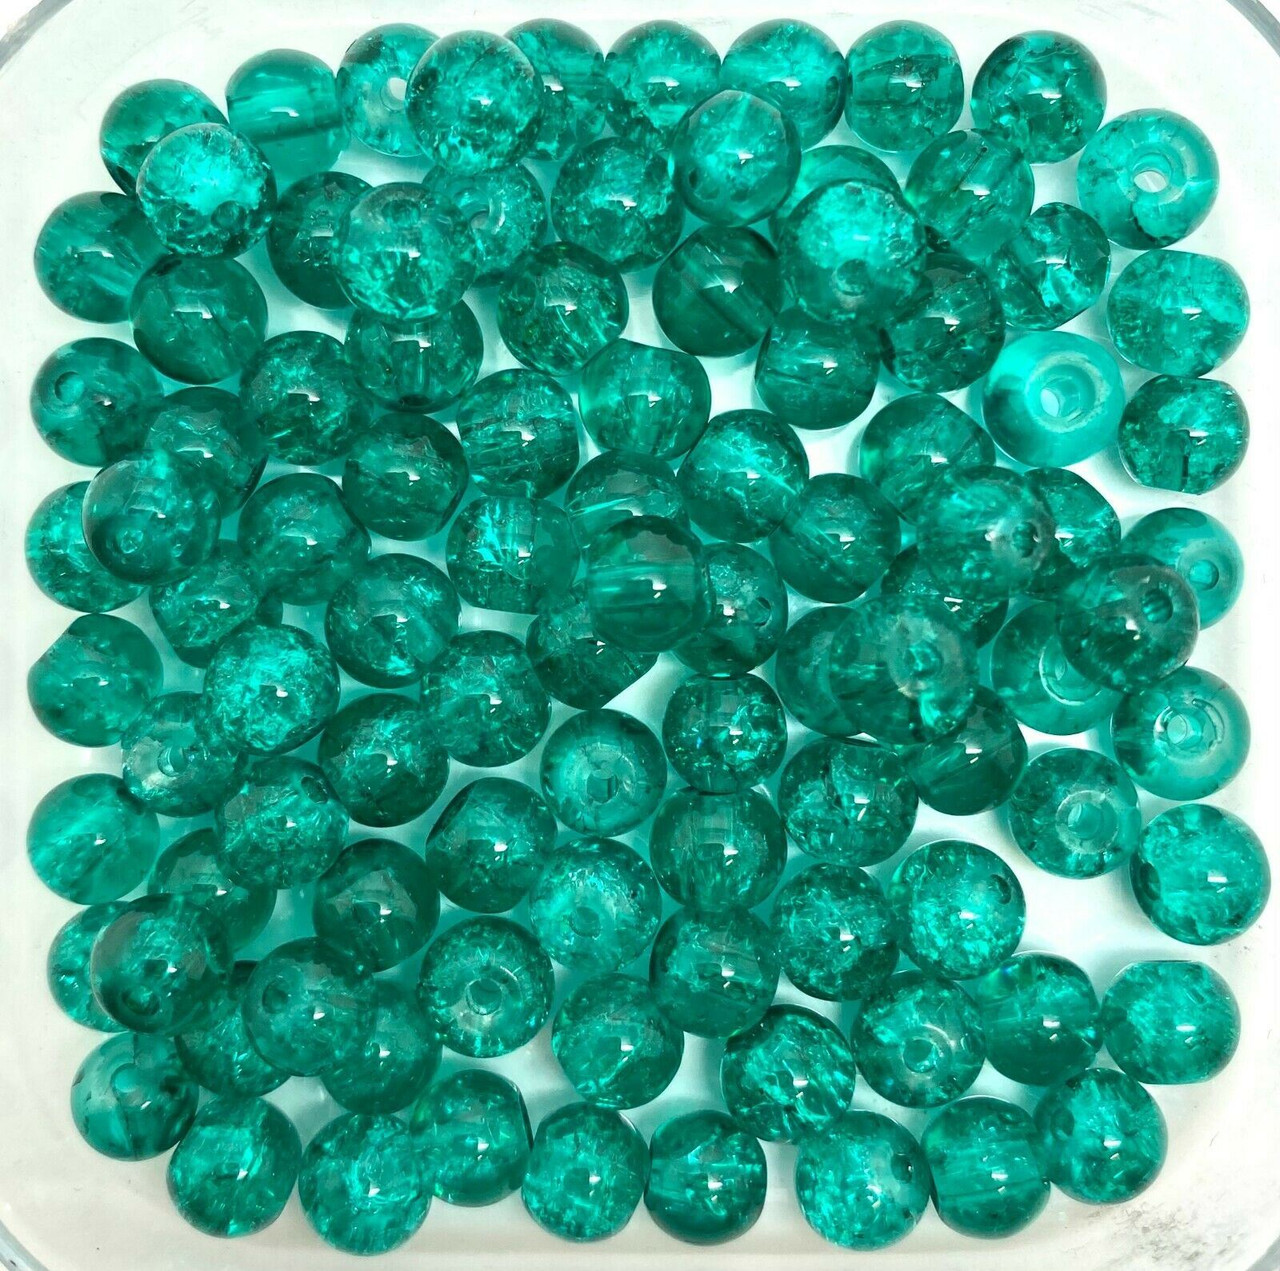 4mm Crackle Glass Beads - Sea Green, 200 beads